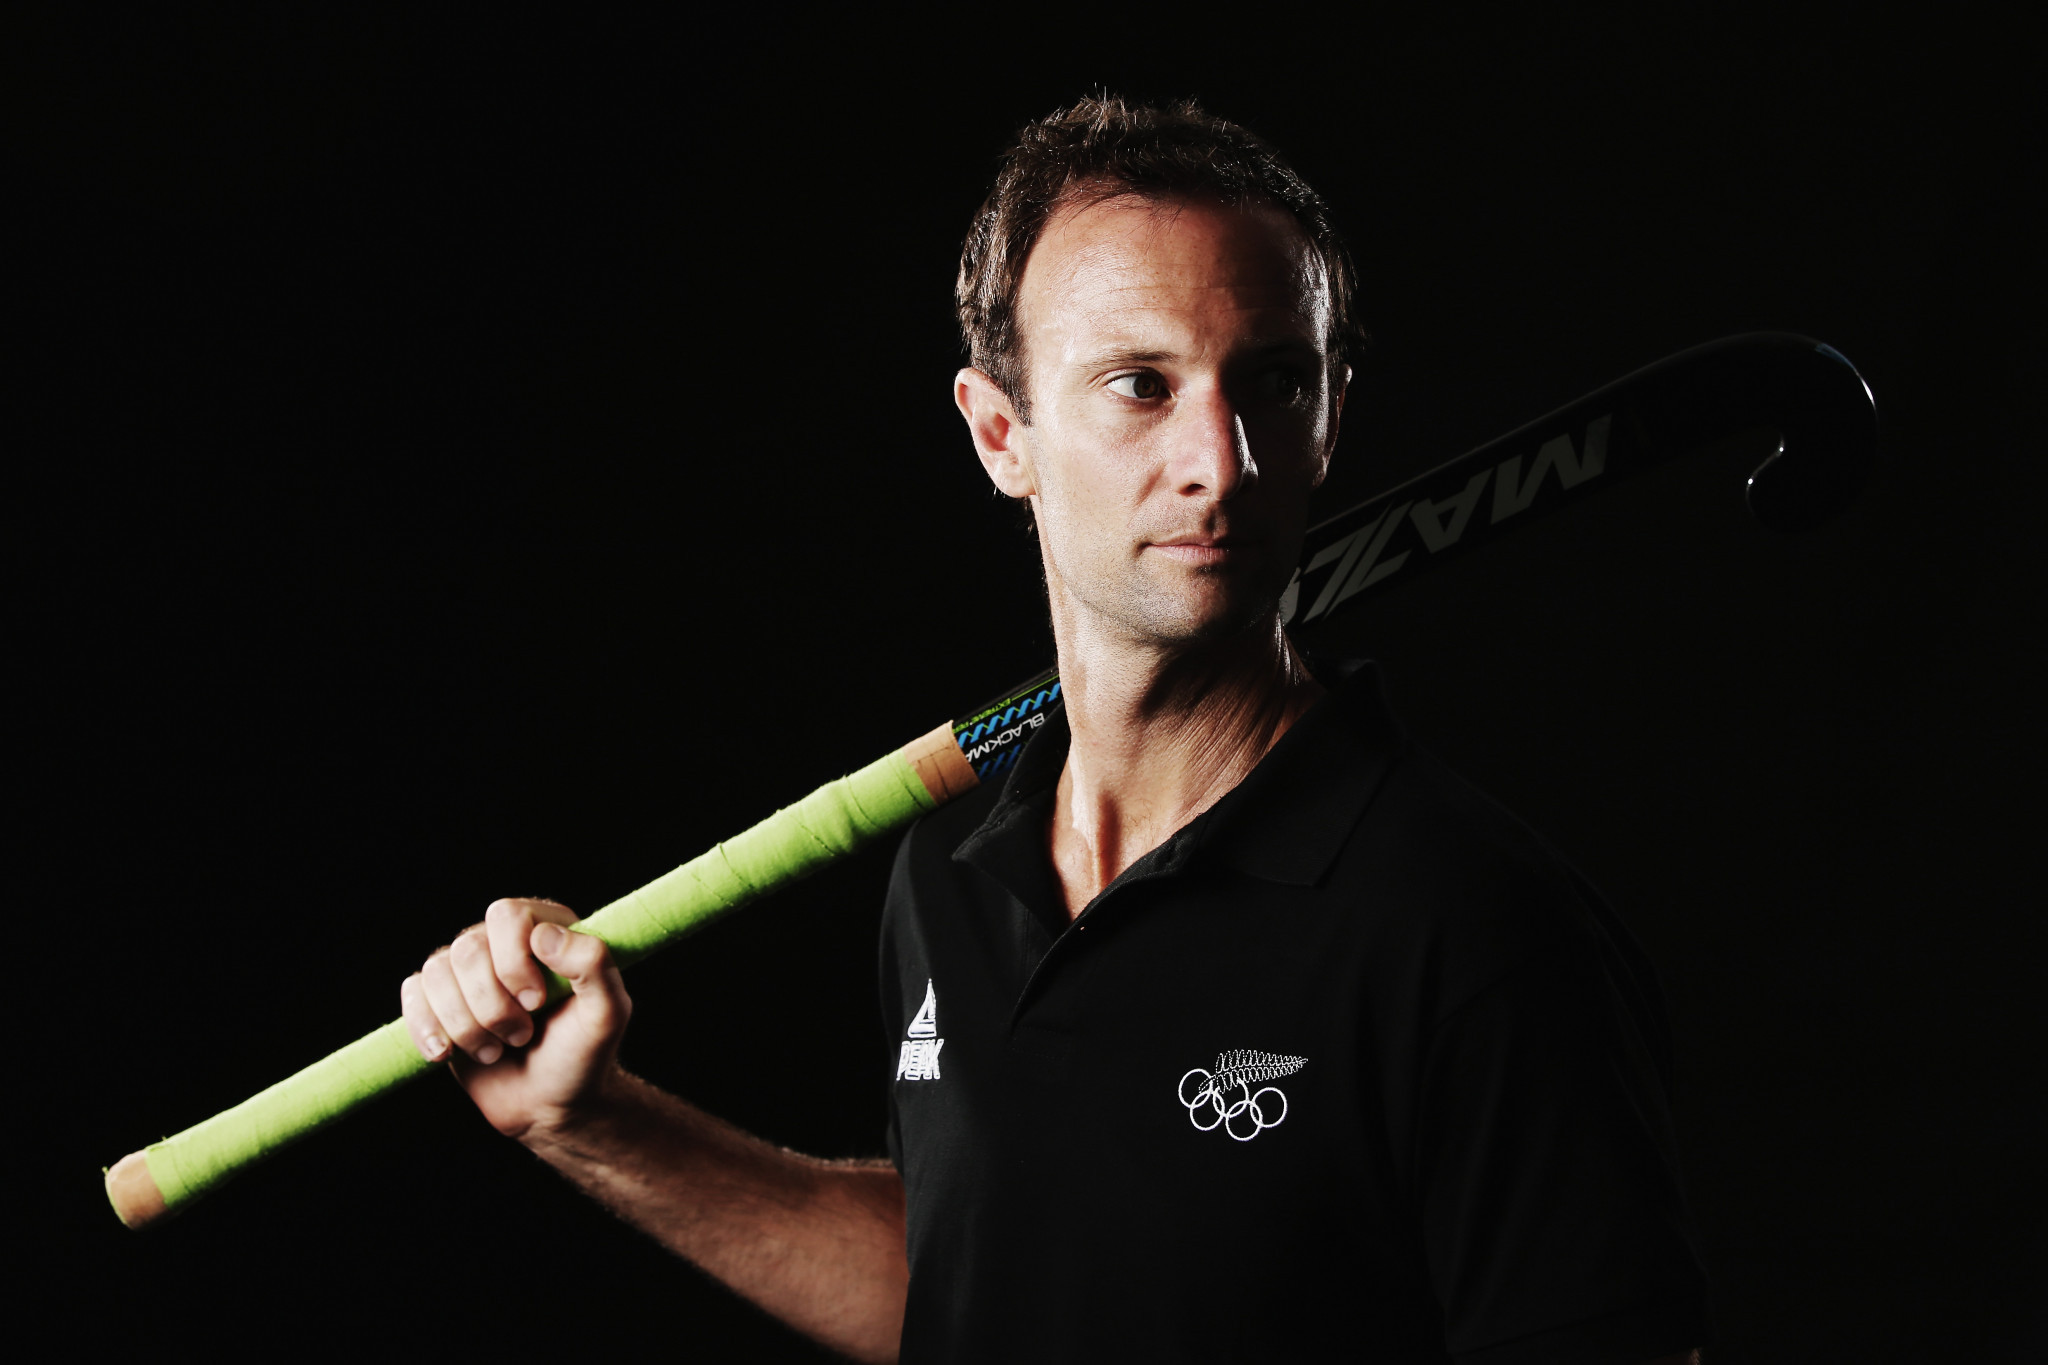 New Zealand Olympic Committee appoints Olympian Archibald as team services director